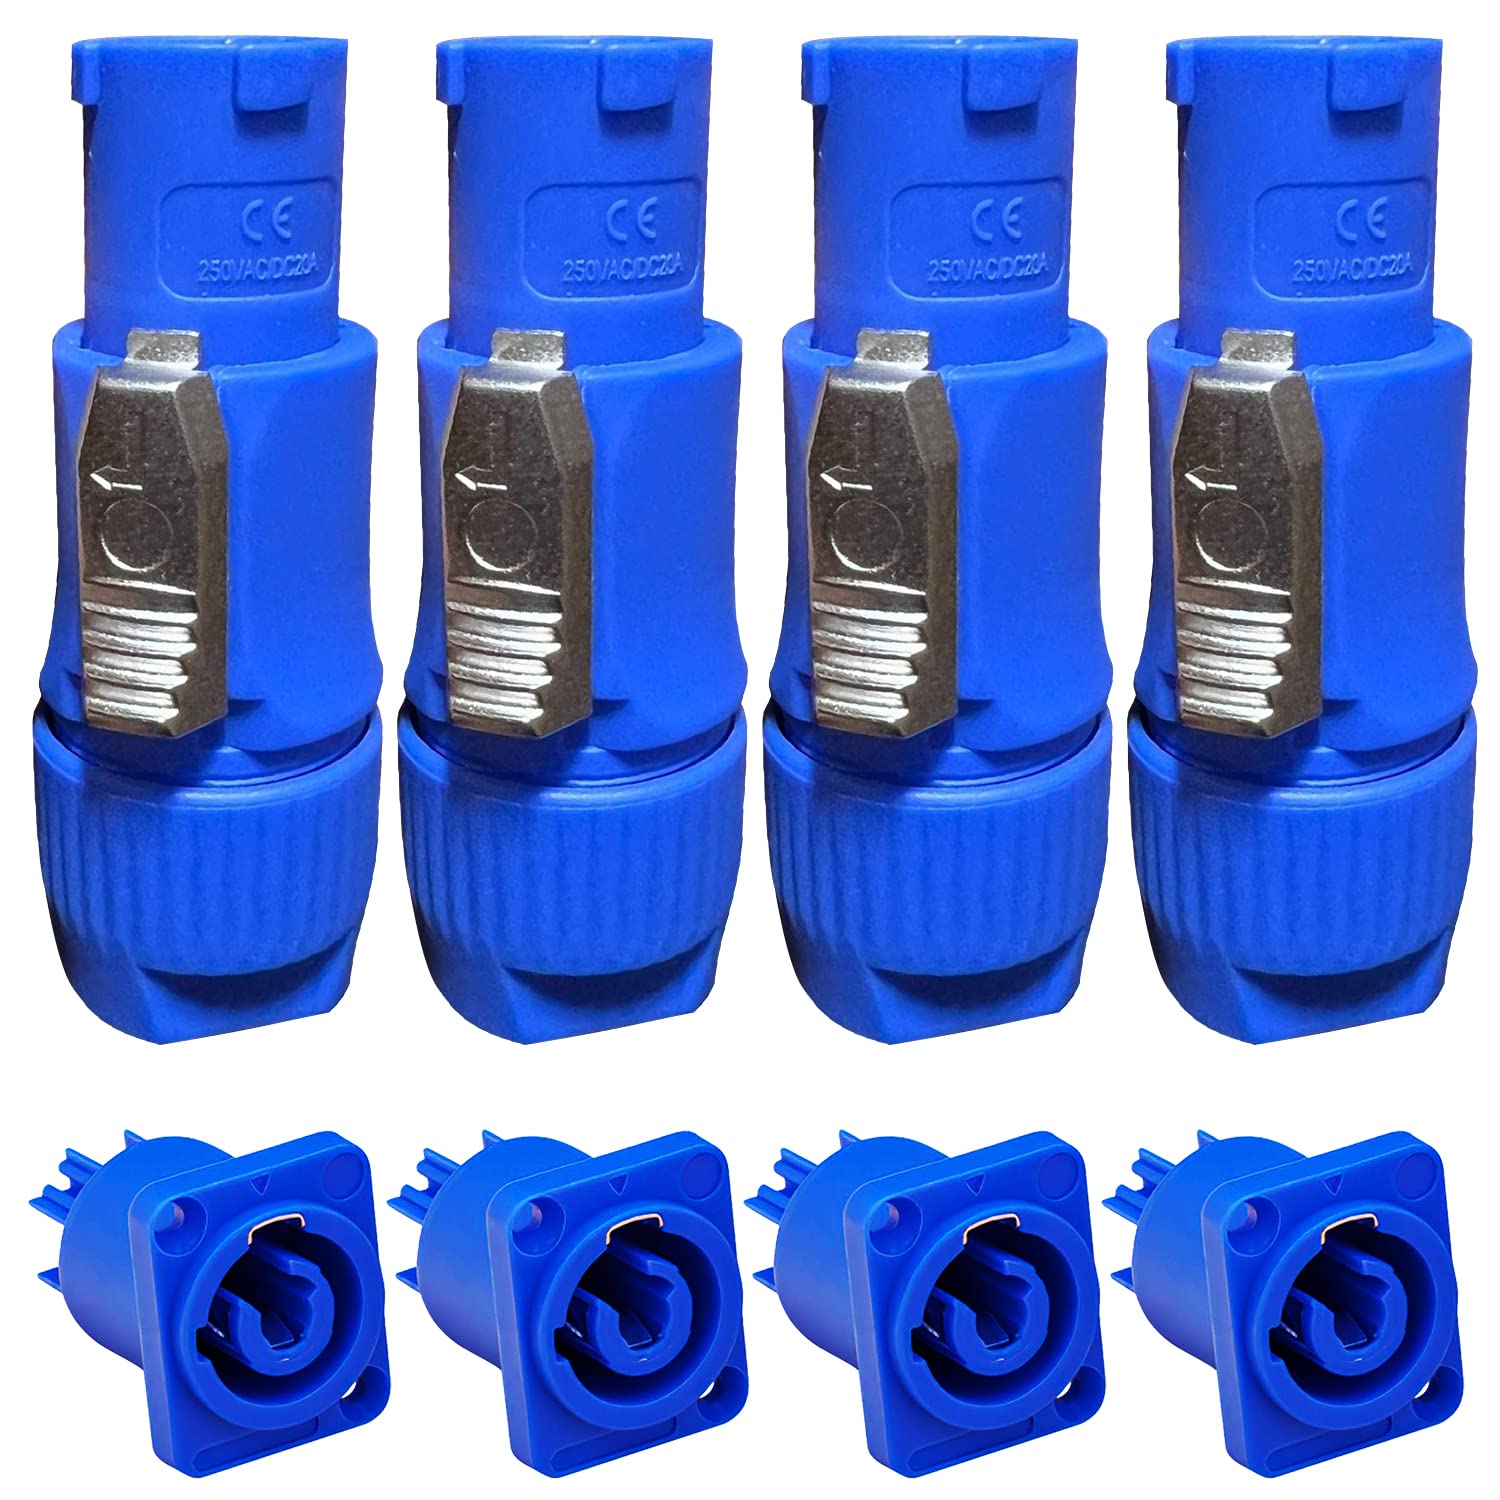 5Core 4 PCS 3-Pin AC PowerCon Male-Female Head Connector Adapter for Stage Light PWR SPKON M/F BLU 4PCS